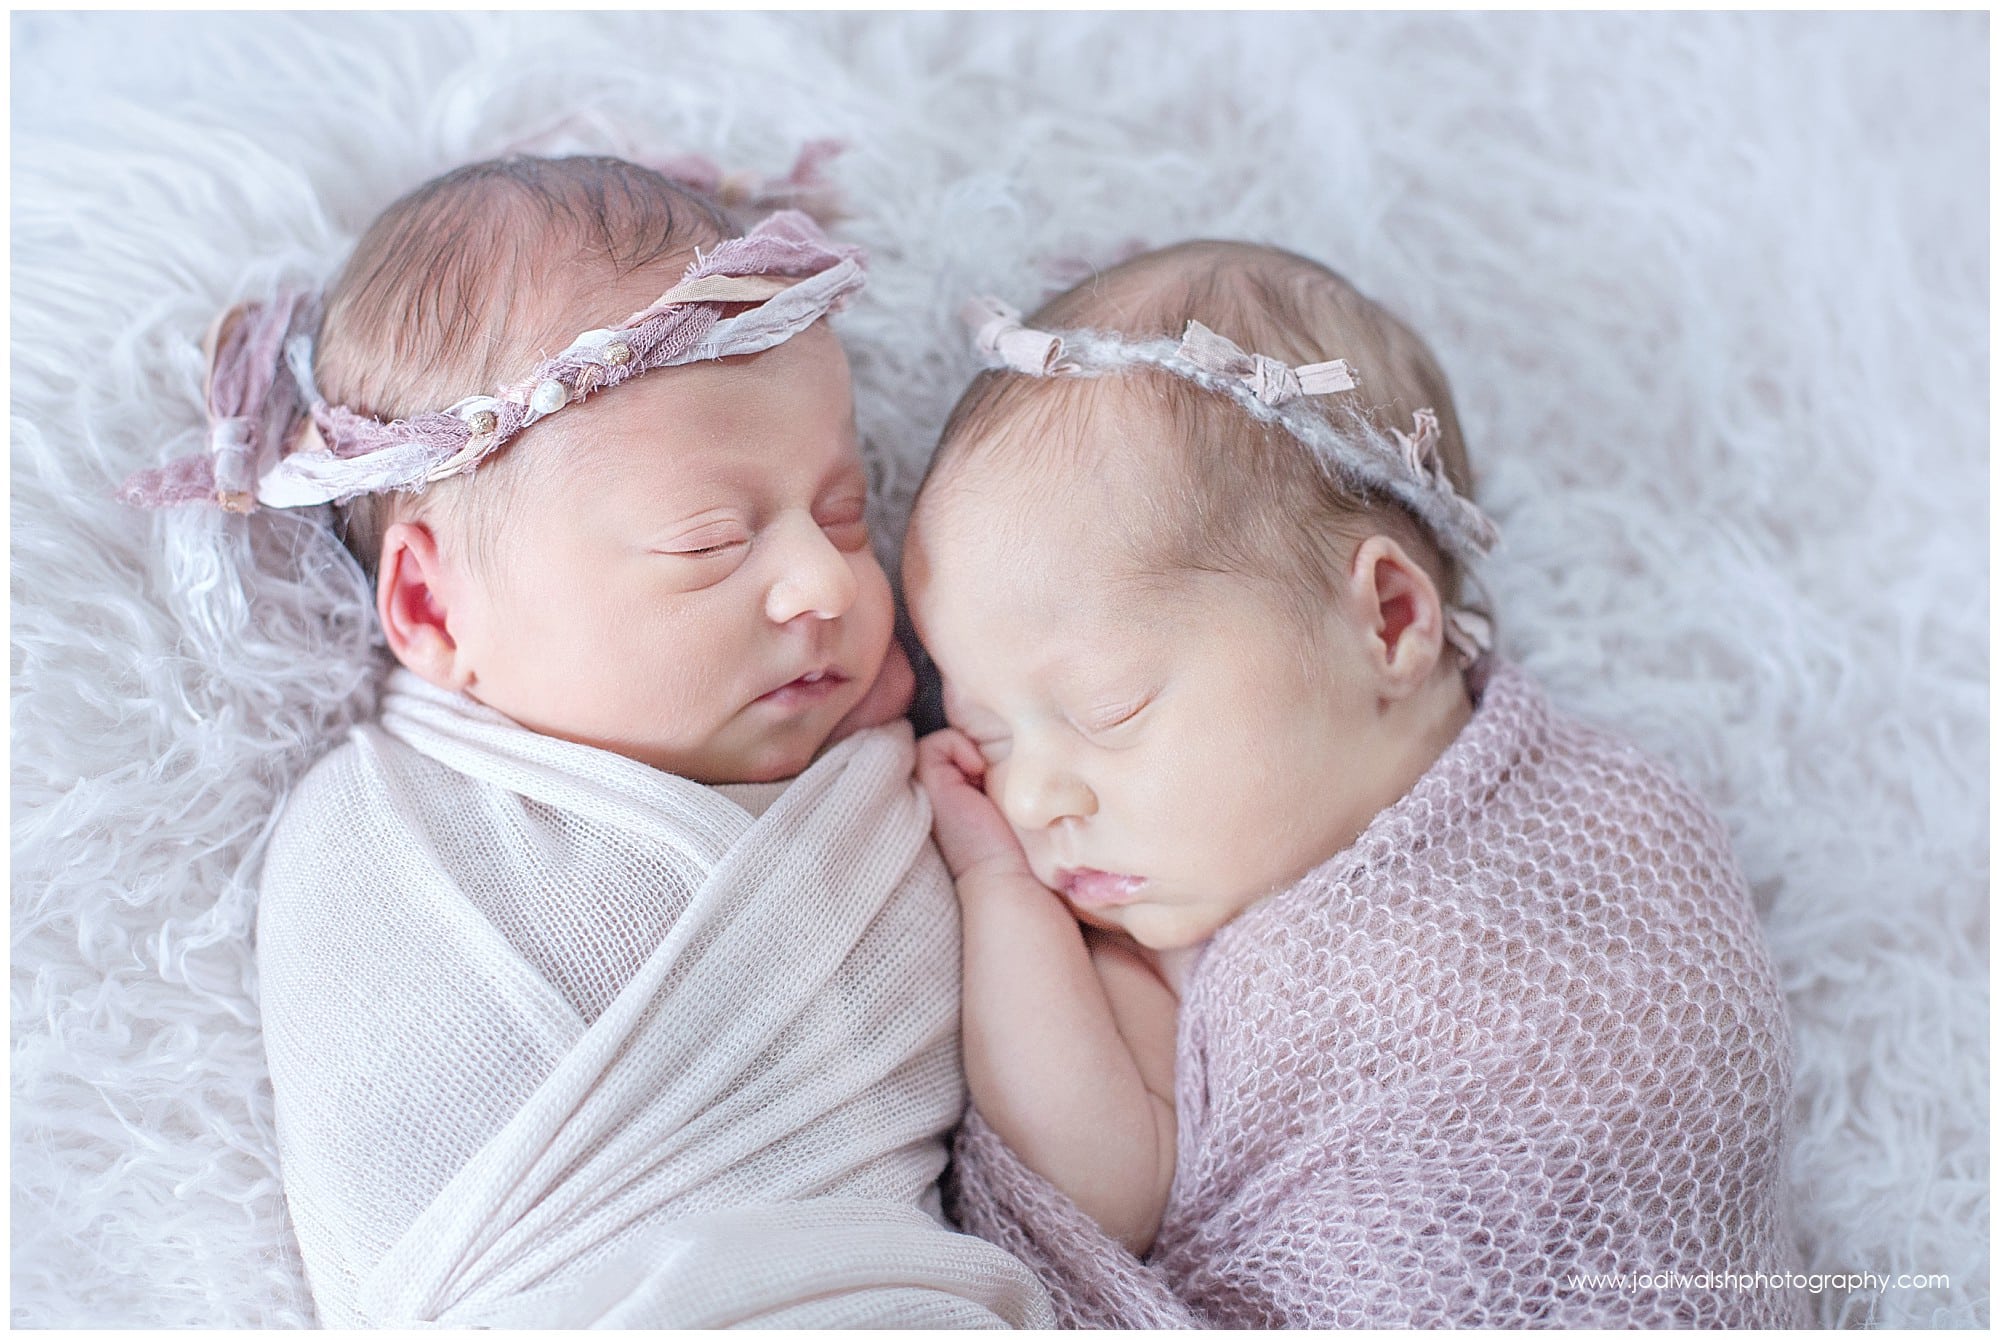 newborn twin girls with pale pink wraps and headbands